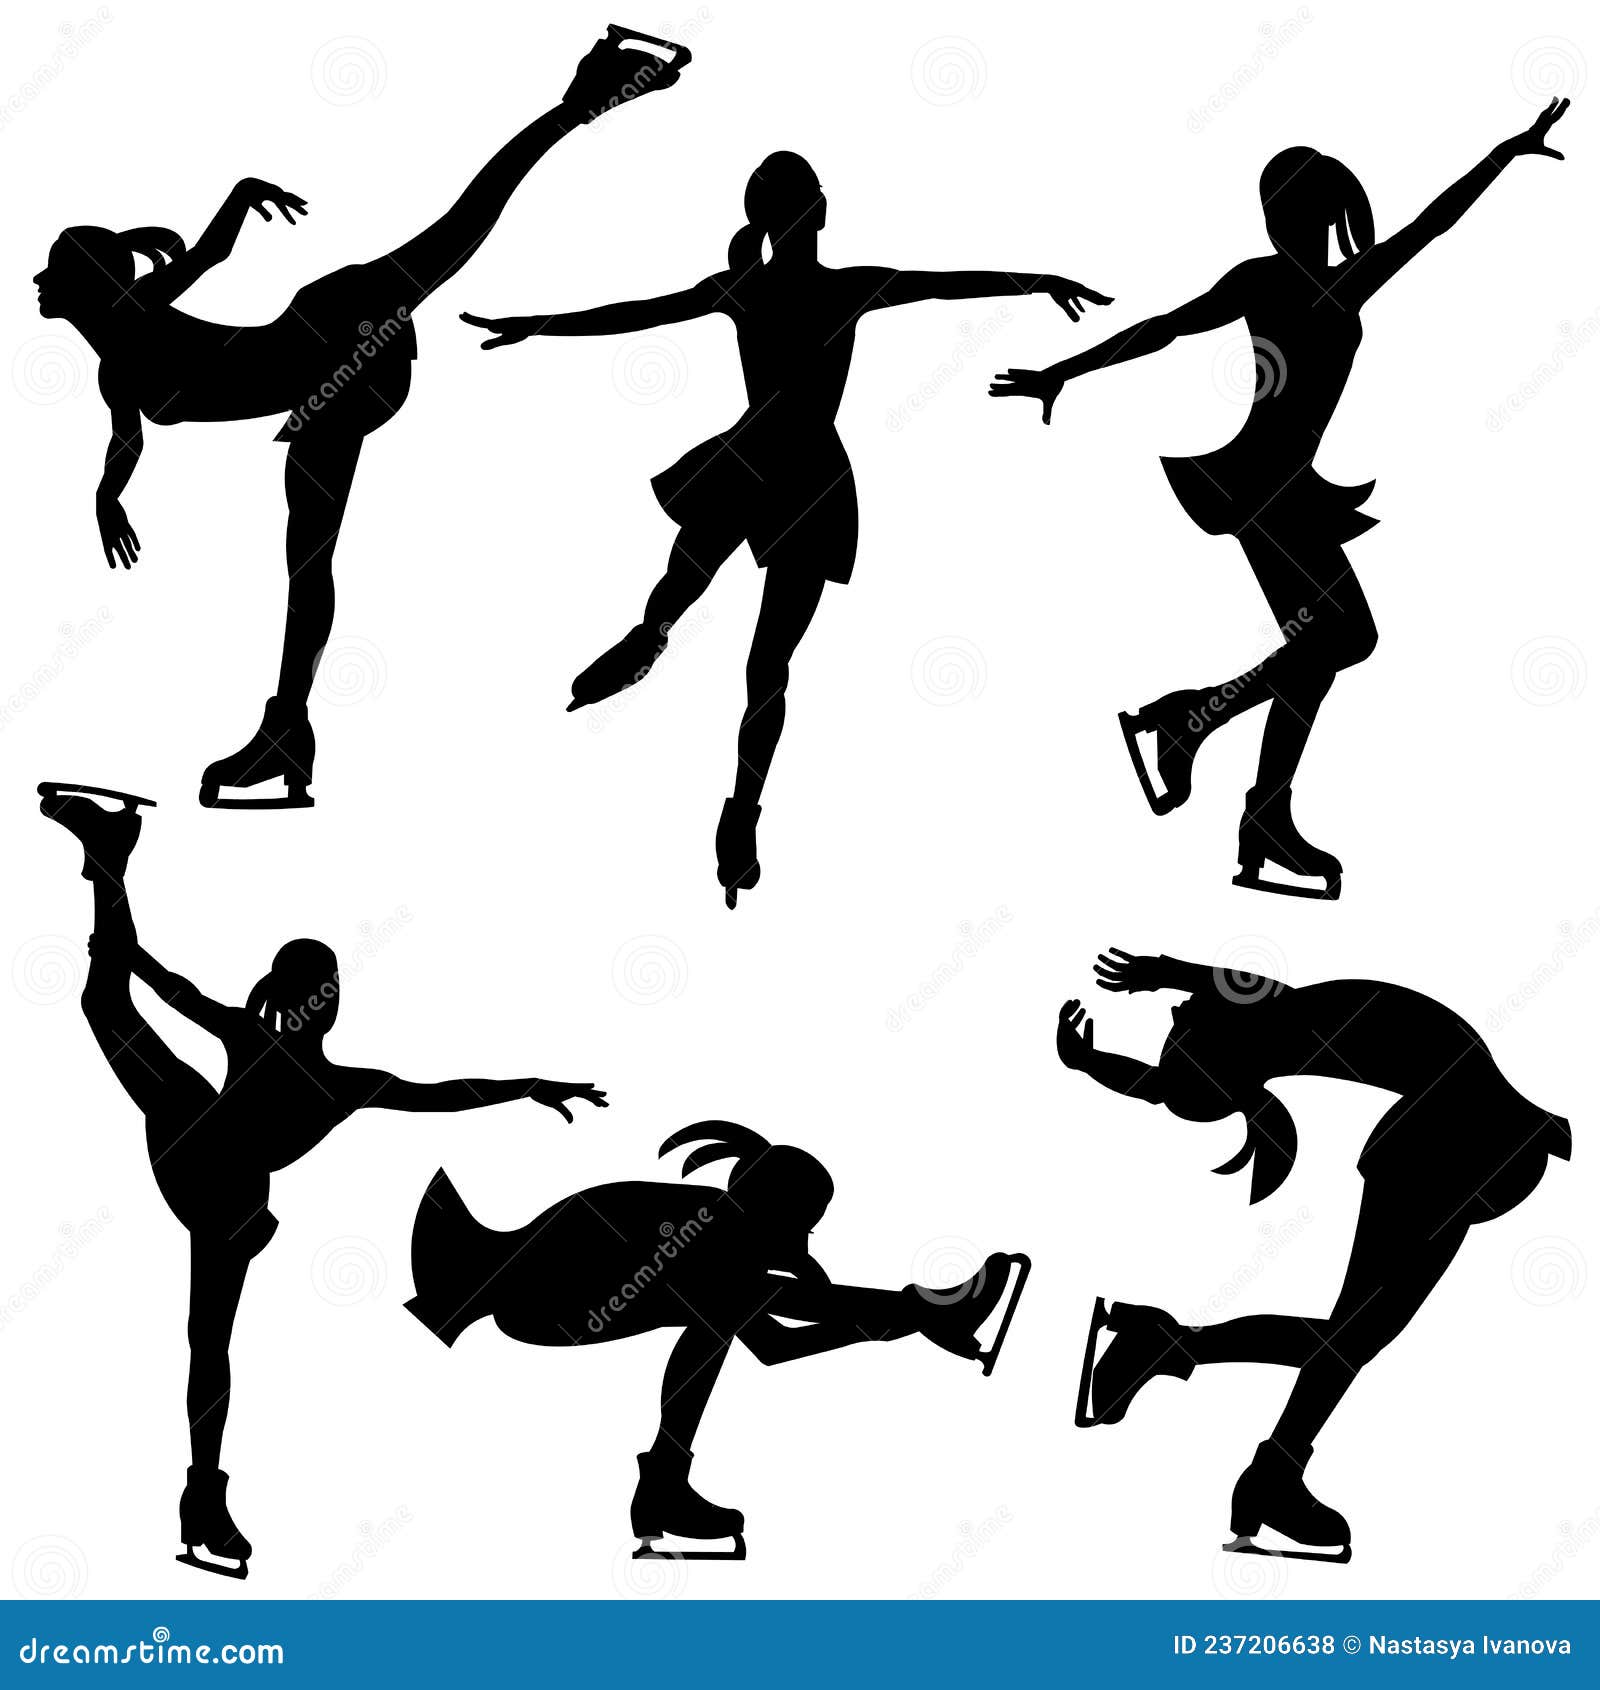   silhouettes of a figure skater girl on a skating rink in a dress for competitions in various poses